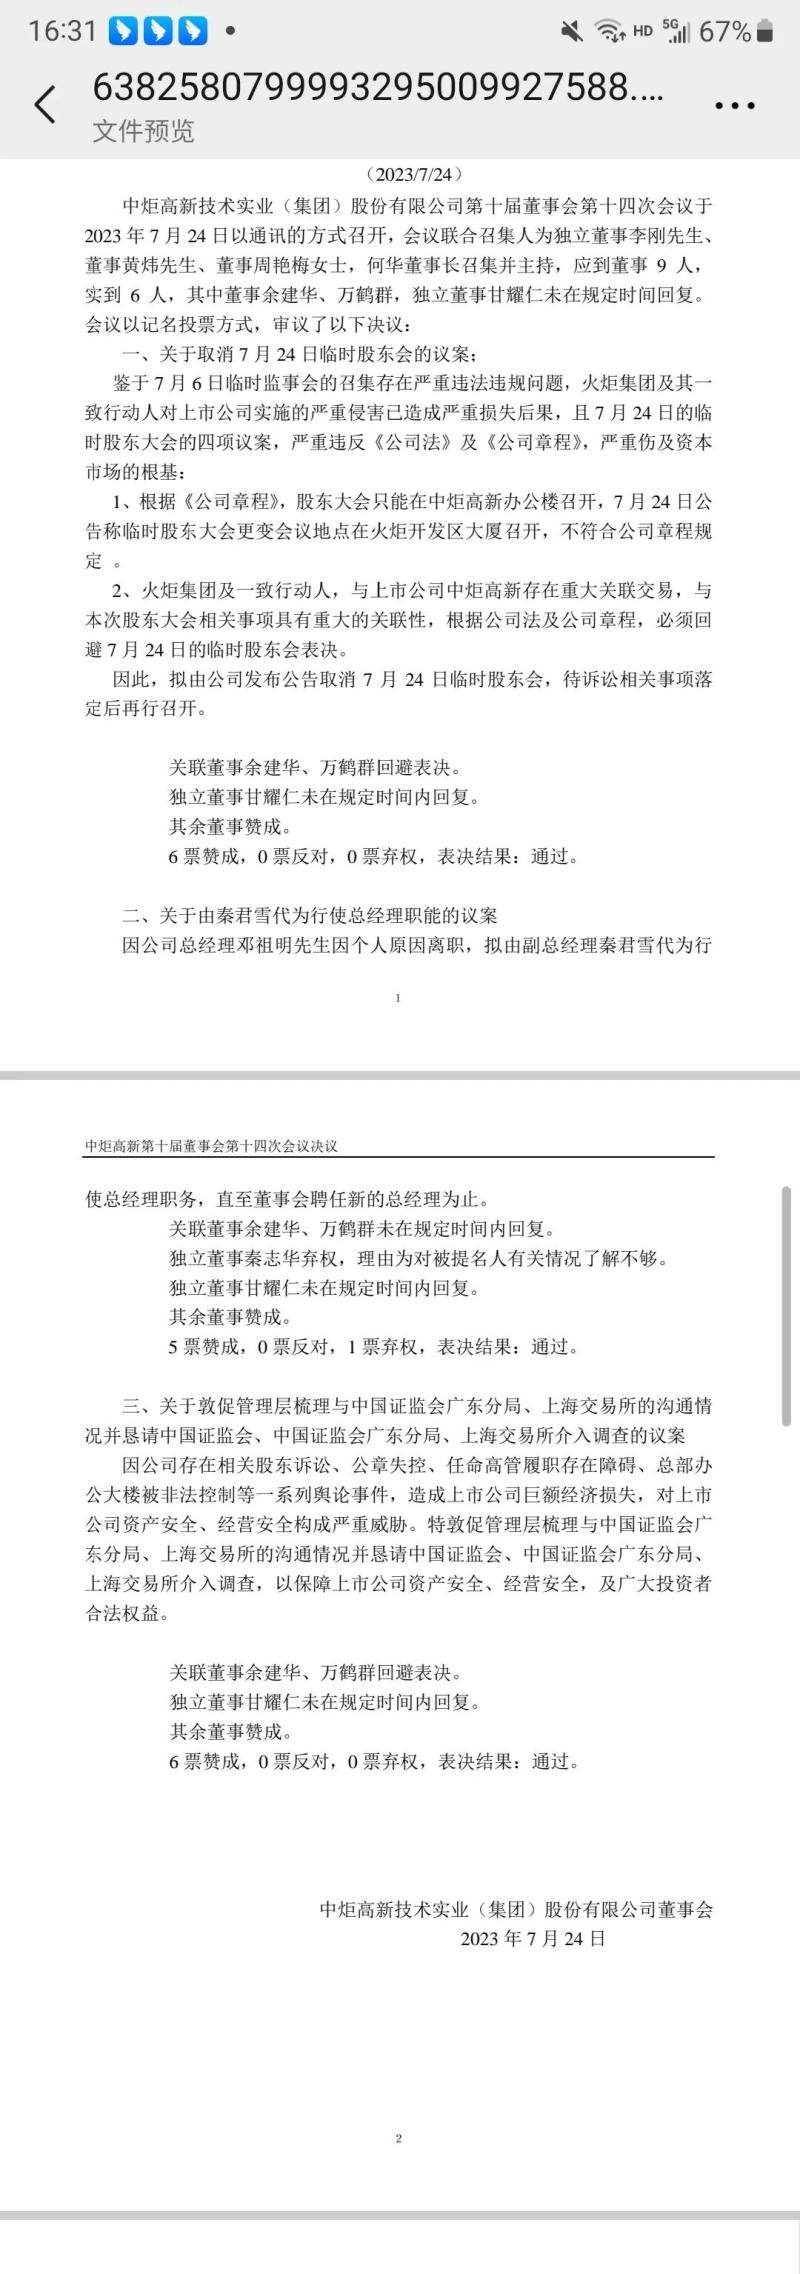 Cancel the proposal for the extraordinary shareholder meeting, and Baoneng releases the "resolution" of Zhongju High tech! Appointment of Qin Junxue as General Manager Shareholders Meeting | Company Articles of Association | Qin Junxue